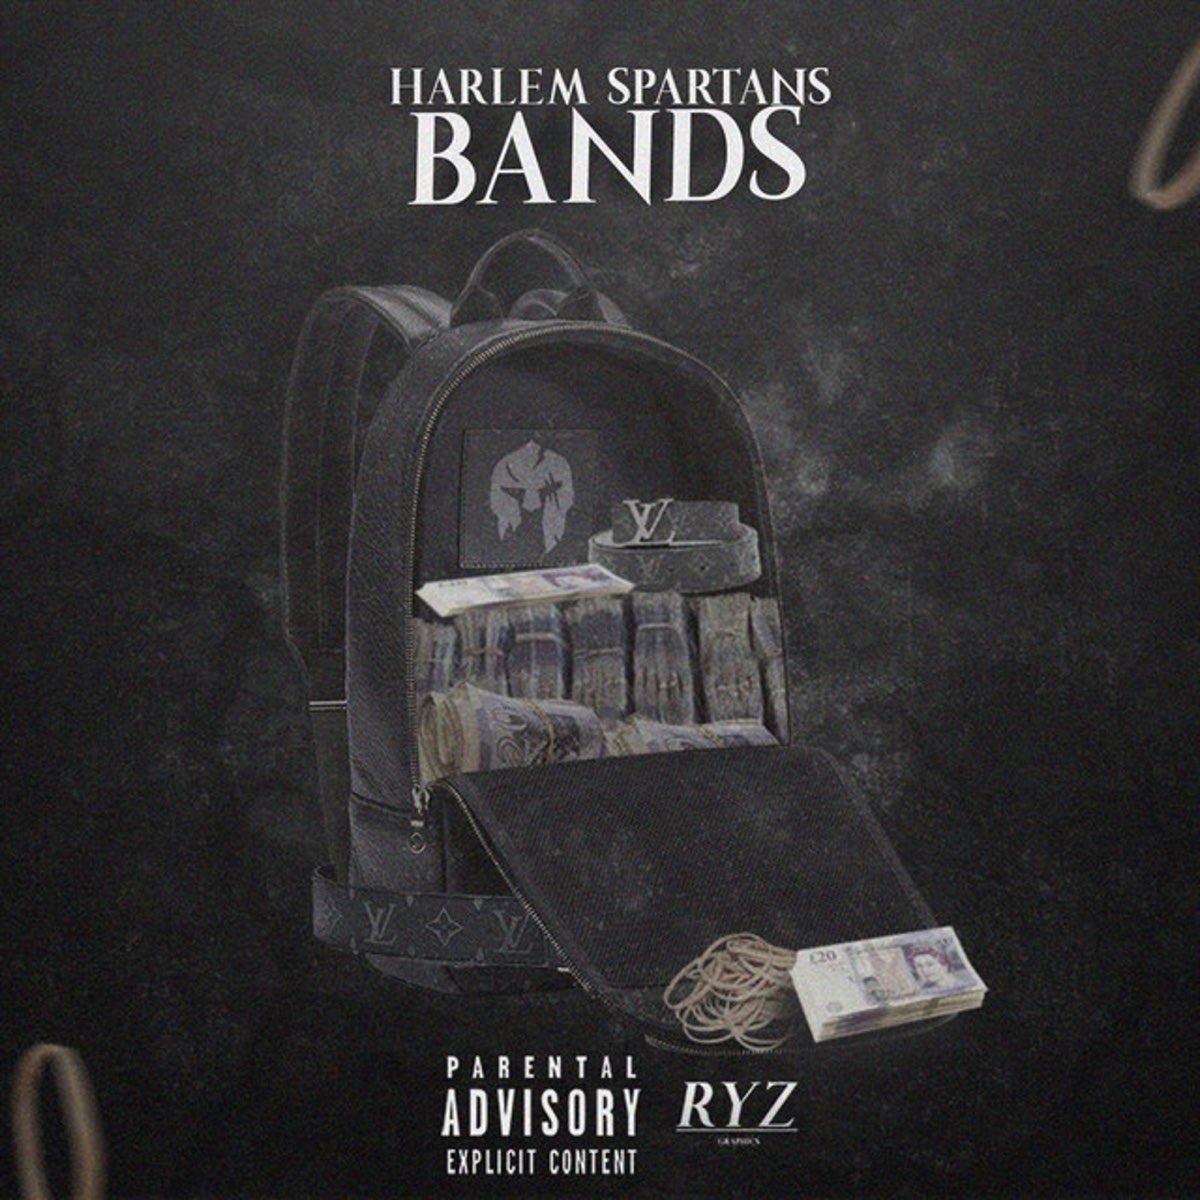 Bands - Single by Harlem Spartans on Apple Music